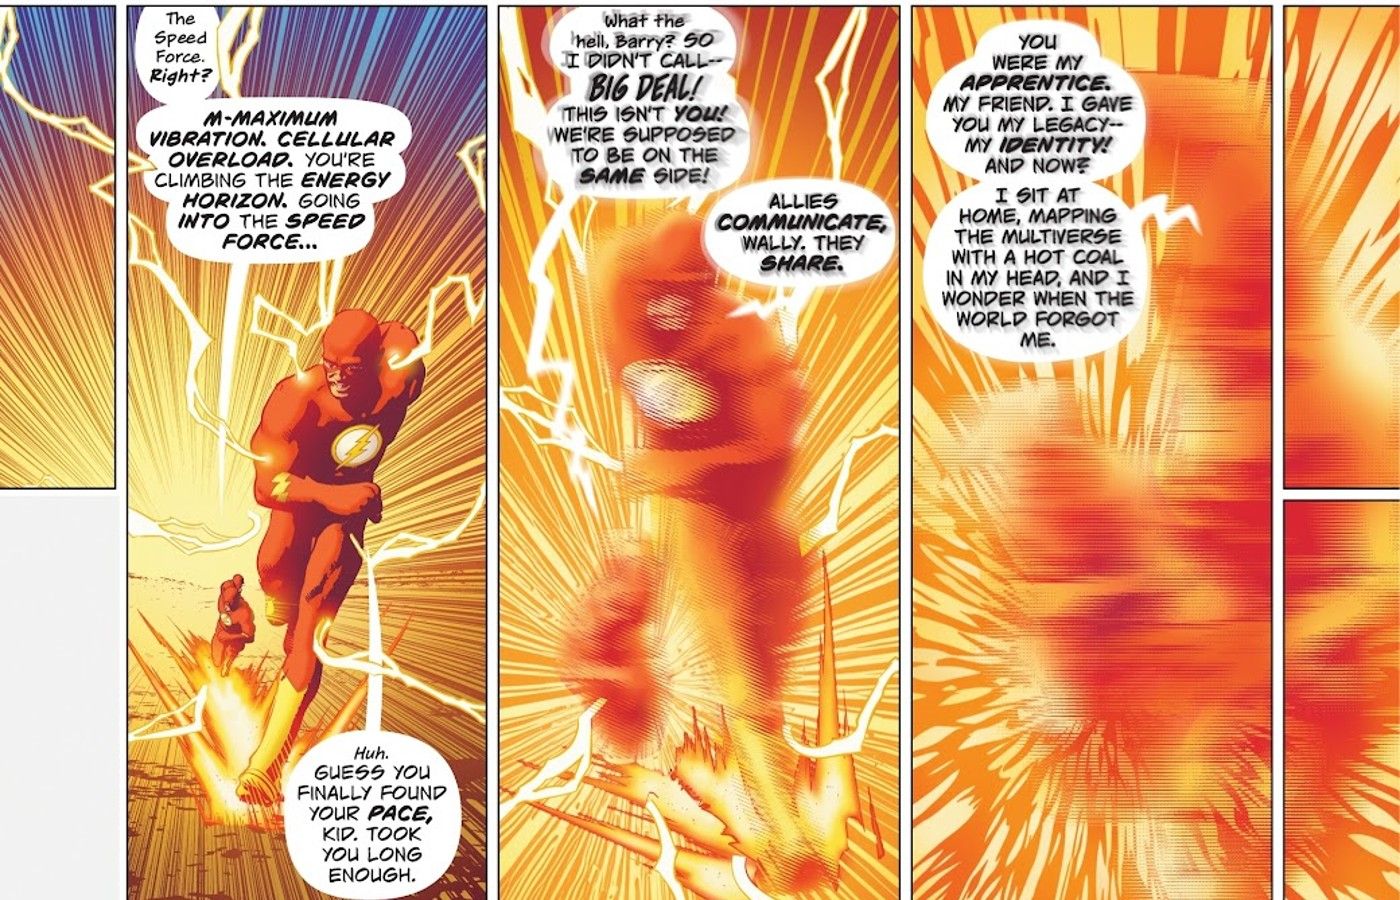 The Flash Wally West and Barry Allen talk about communicating